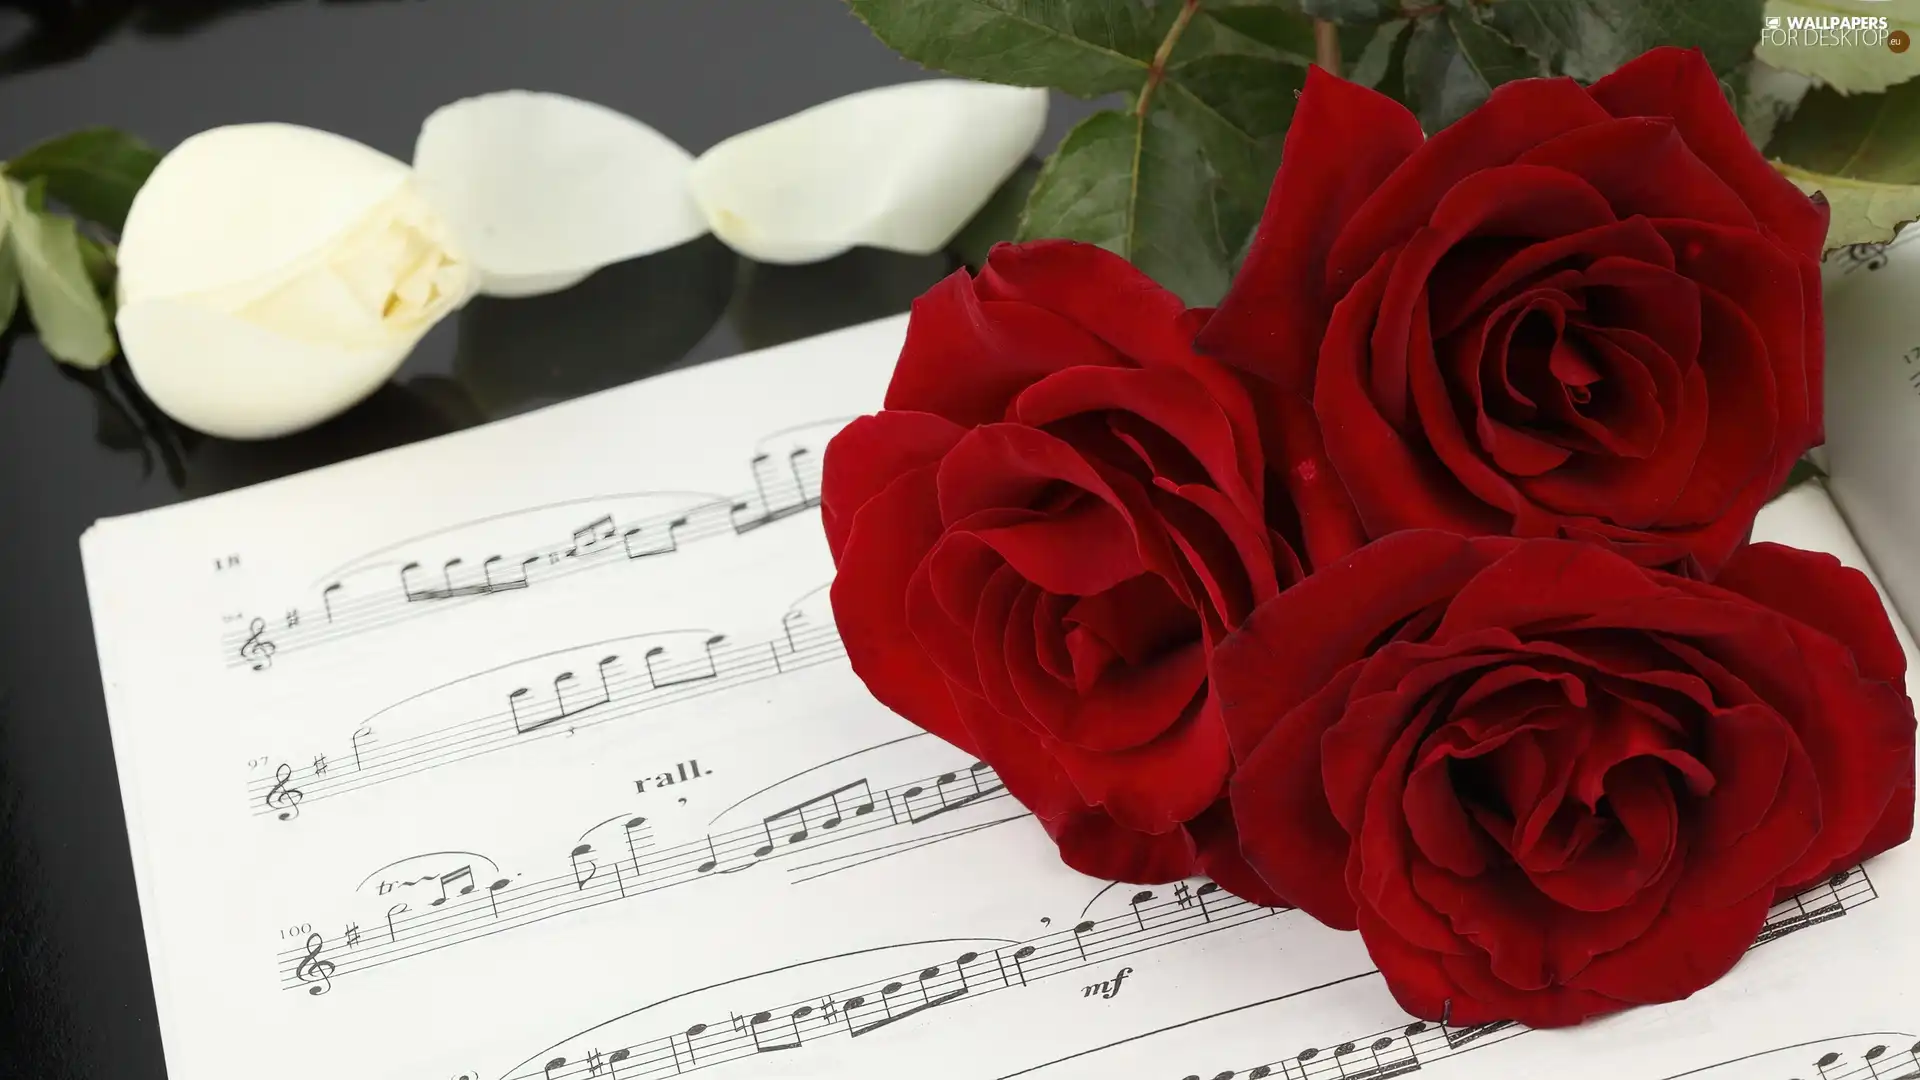 Tunes, Red, roses